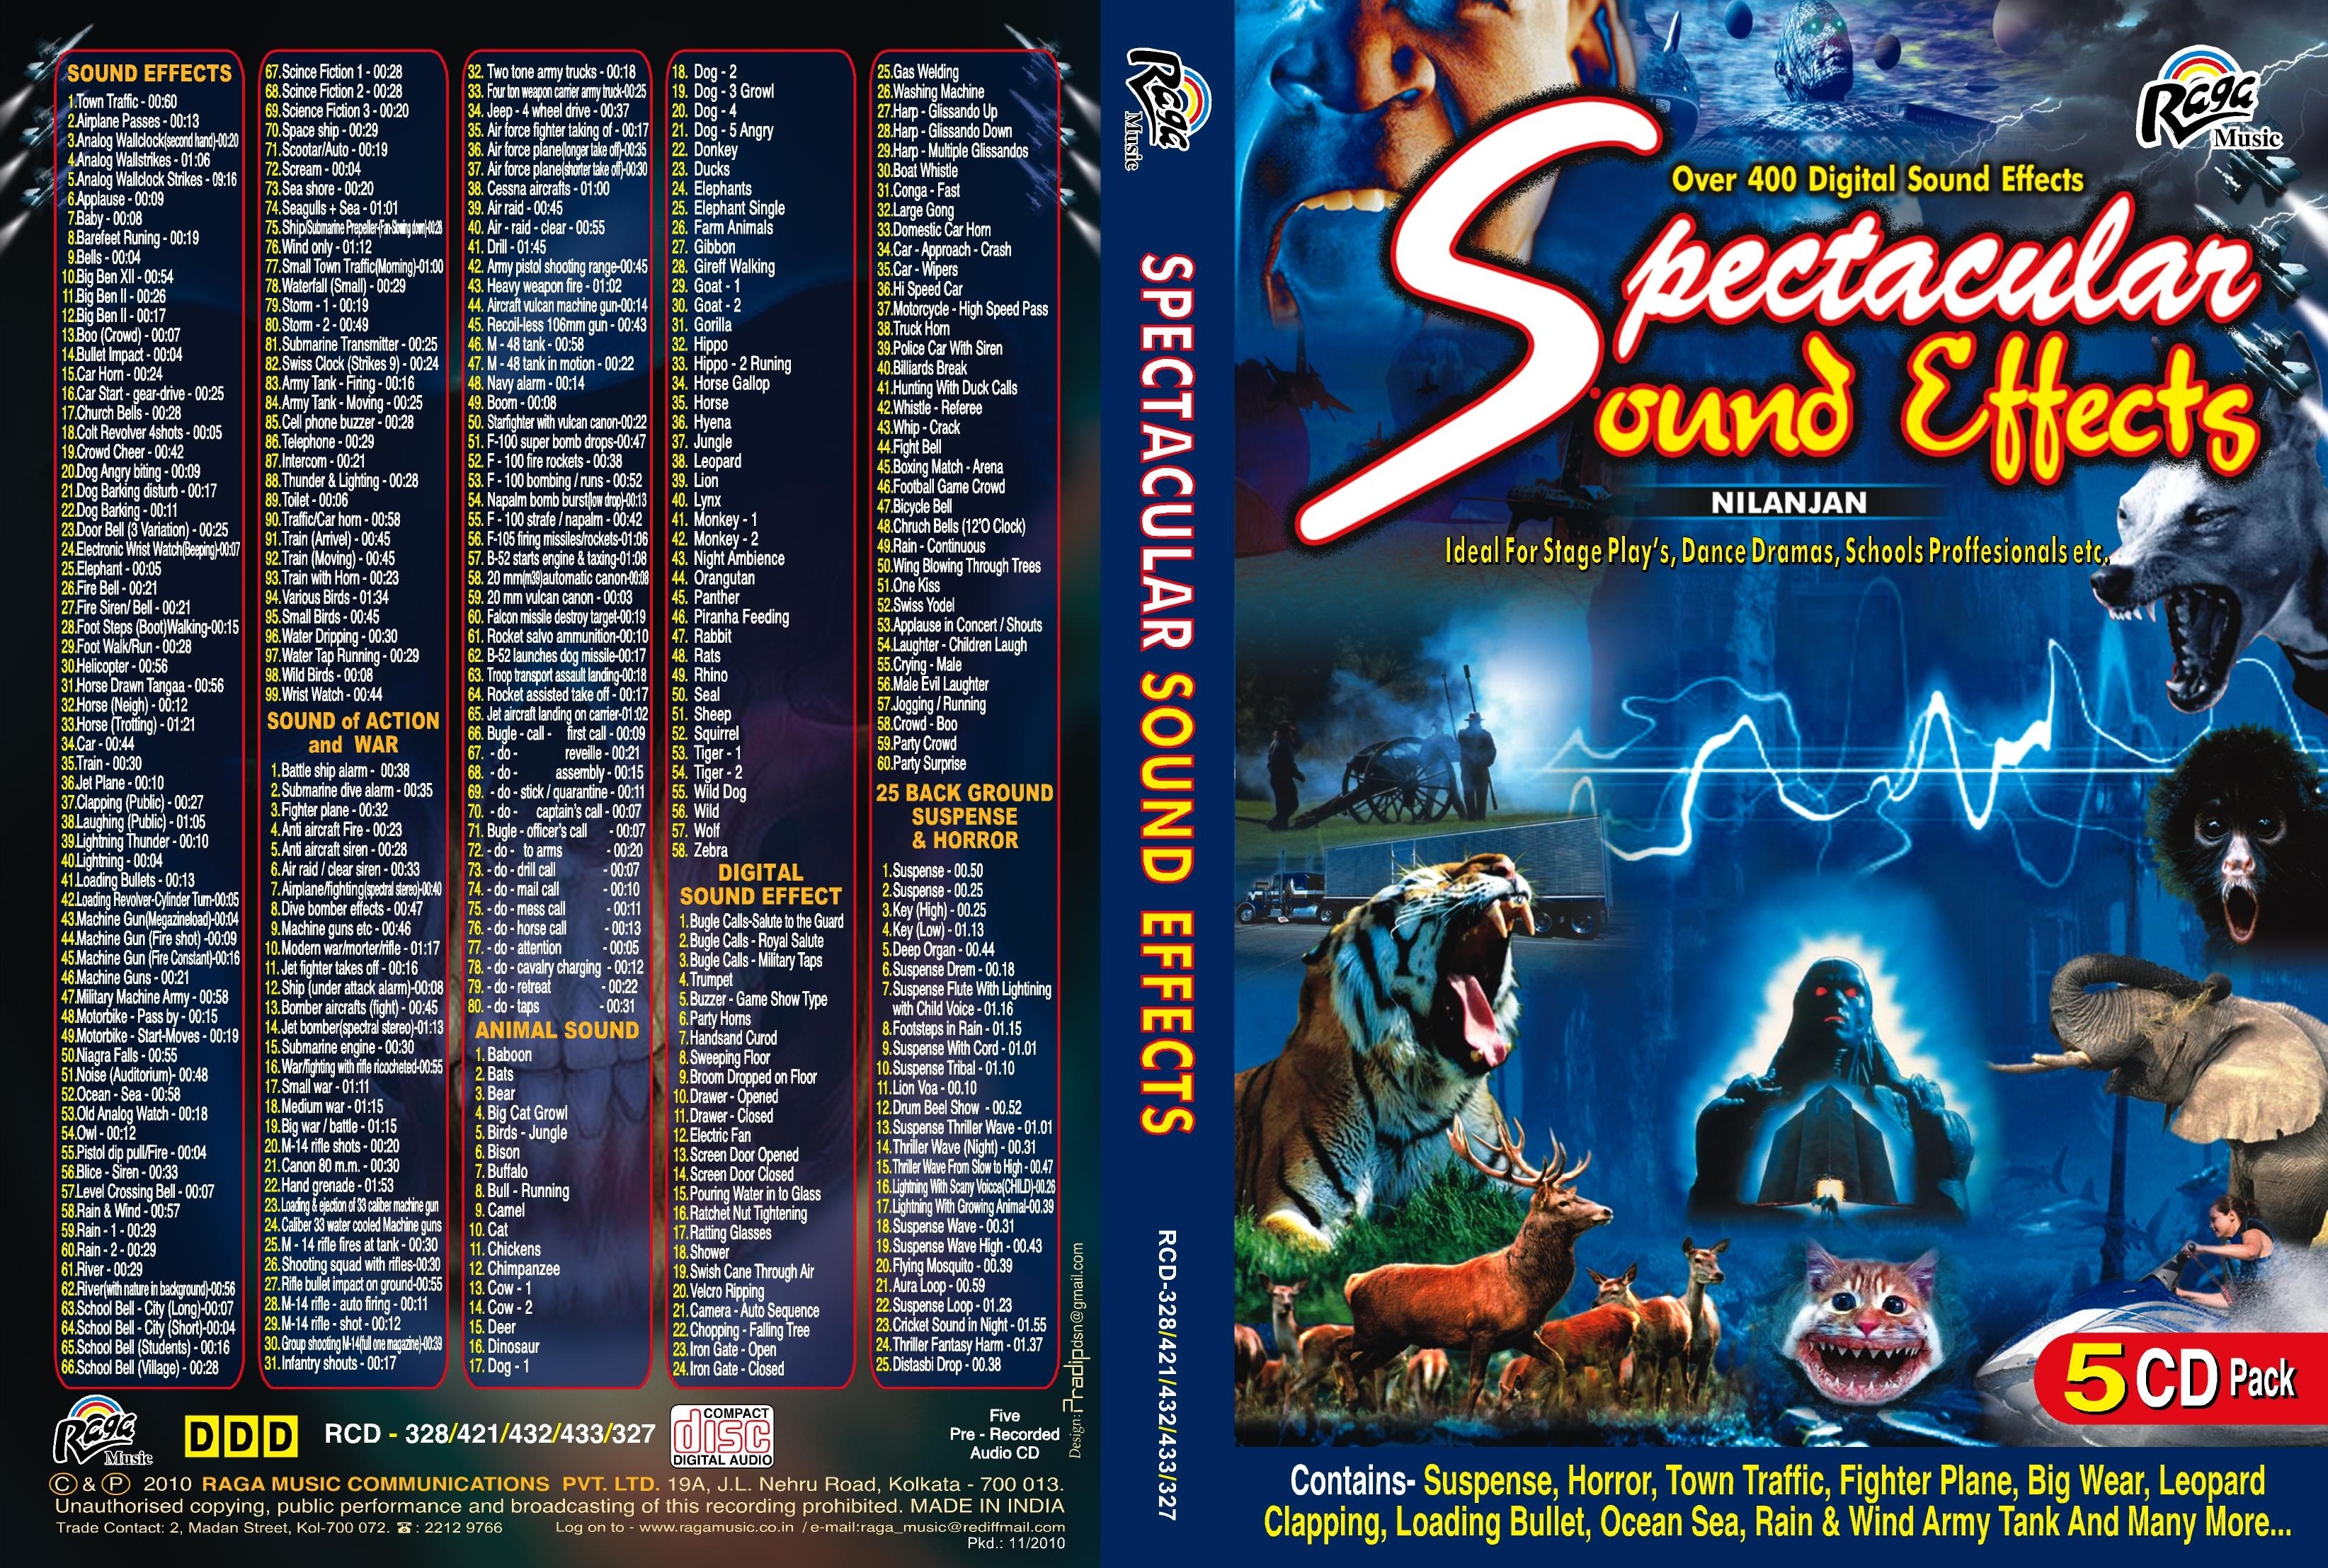 Spectacular Sound Effects 5CD